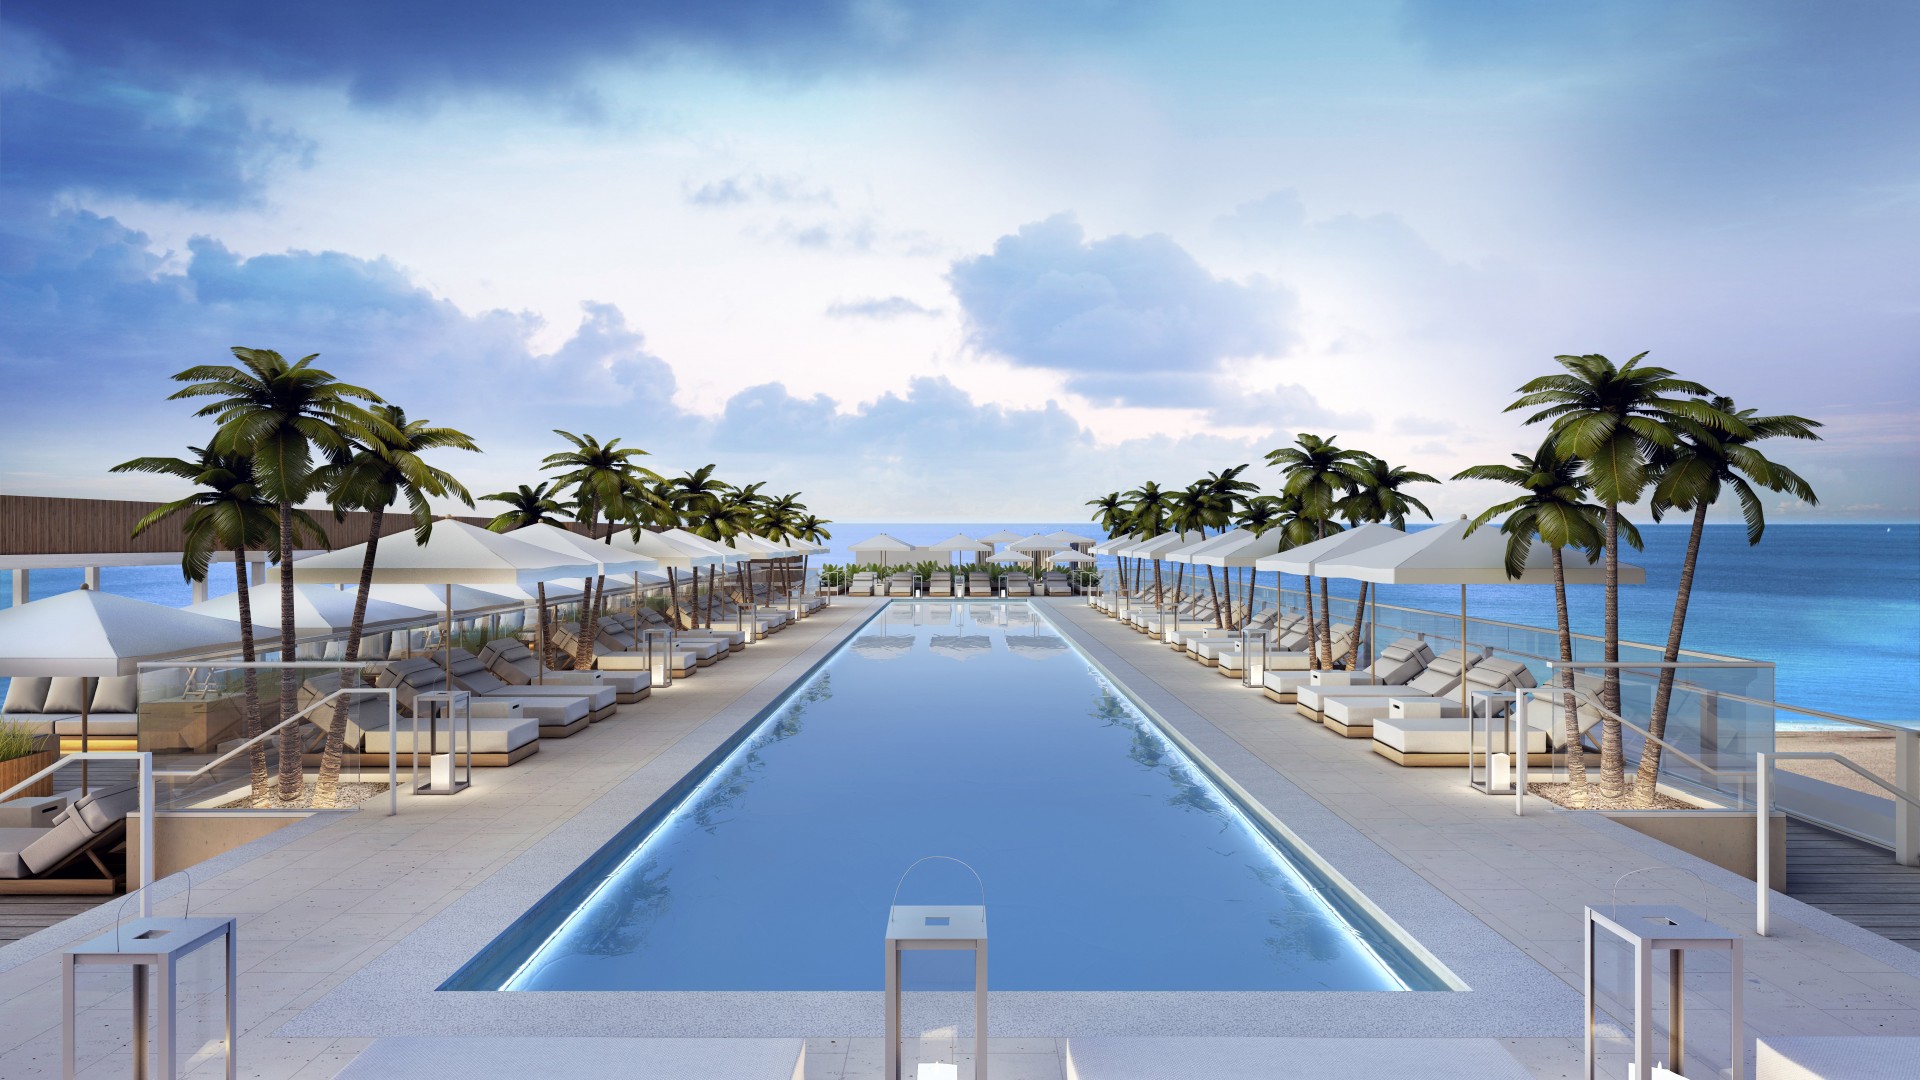 Miami, south beach, hotel, pool, sunbed, water, palm, sky, sea, ocean, water, travel, vacation, booking (horizontal)